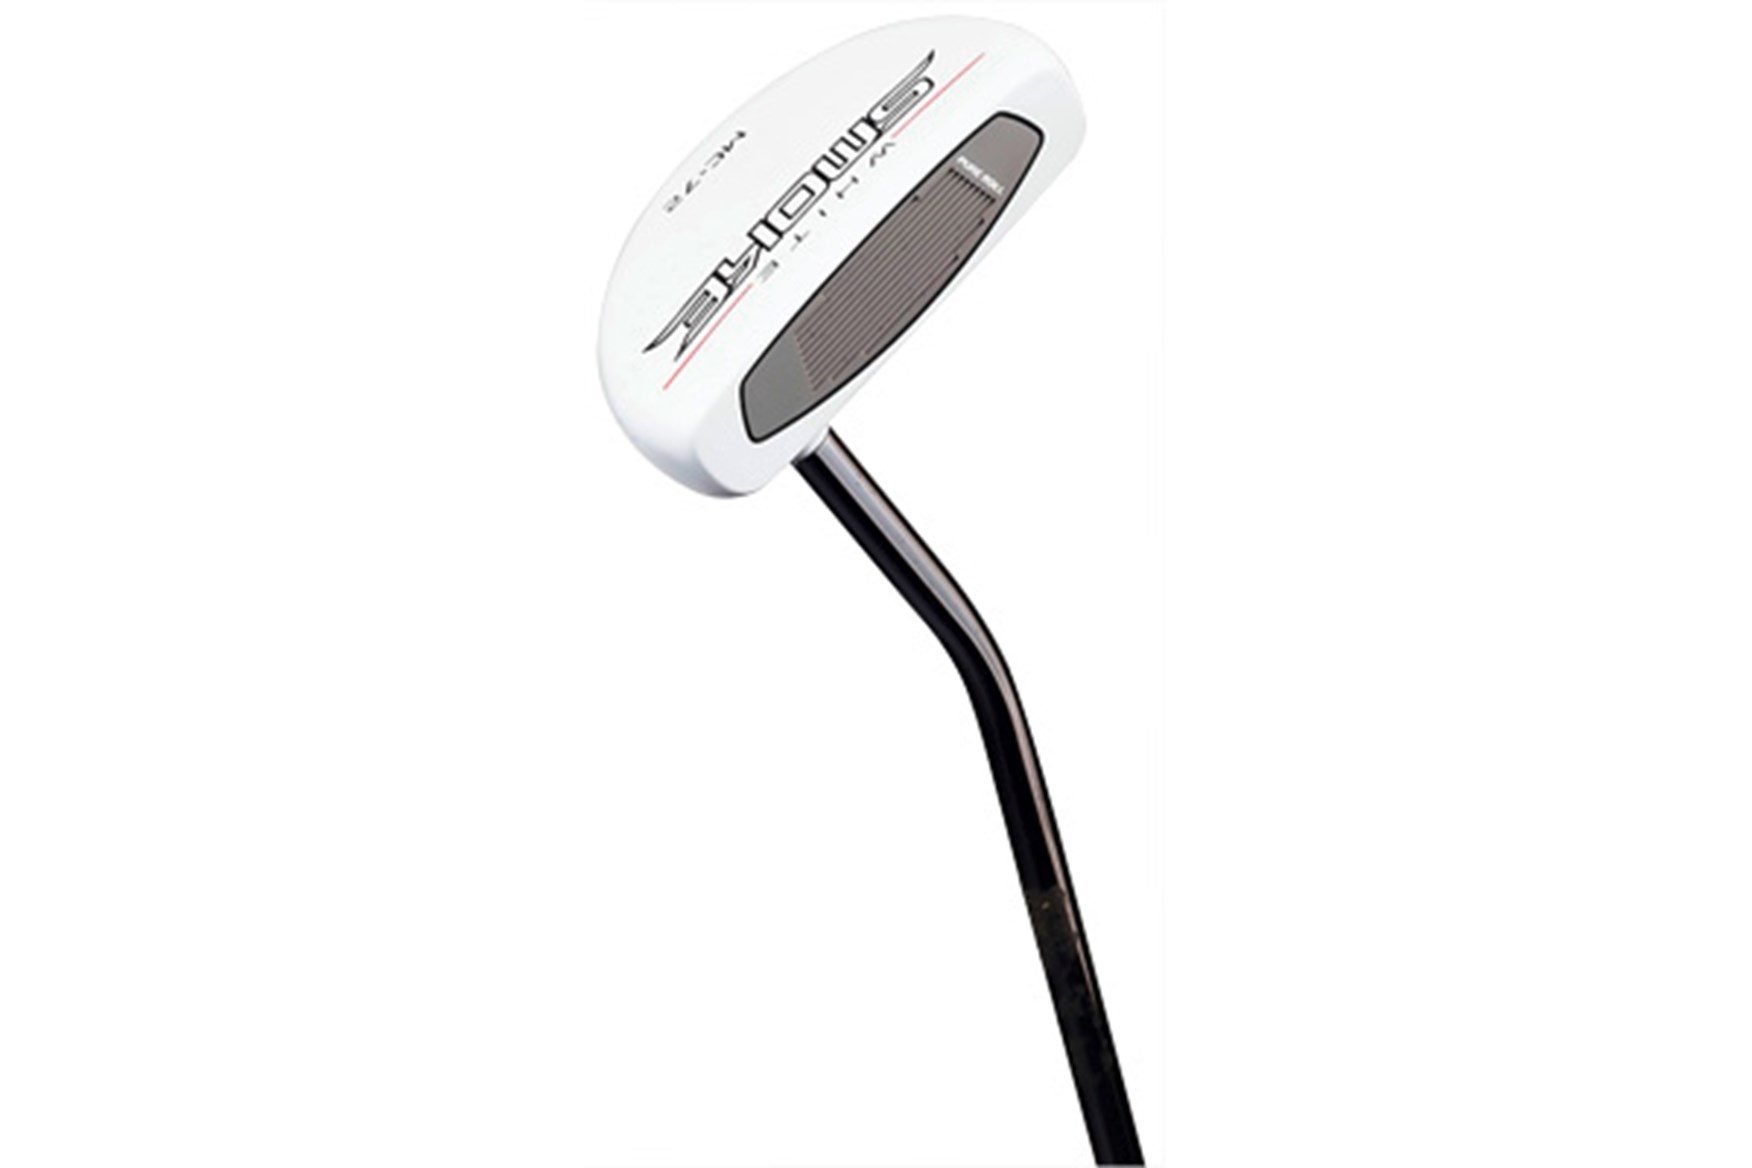 Taylormade White Smoke MC-72 Mallet Putter Review | Equipment ...